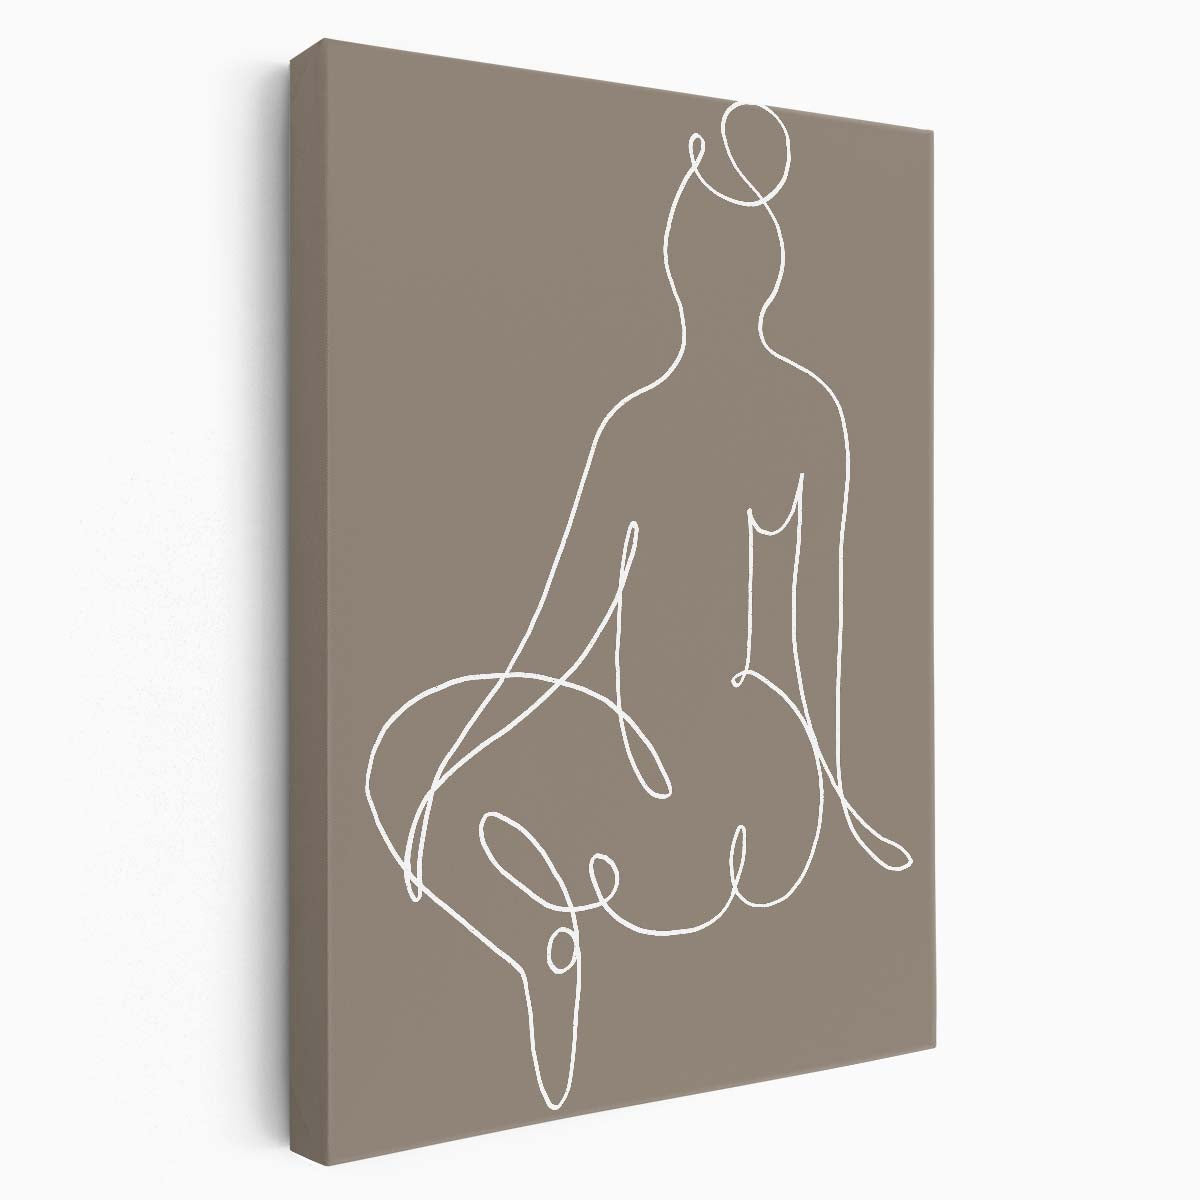 Minimalist Beige Line Art Illustration of Abstract Female Portrait by Luxuriance Designs, made in USA